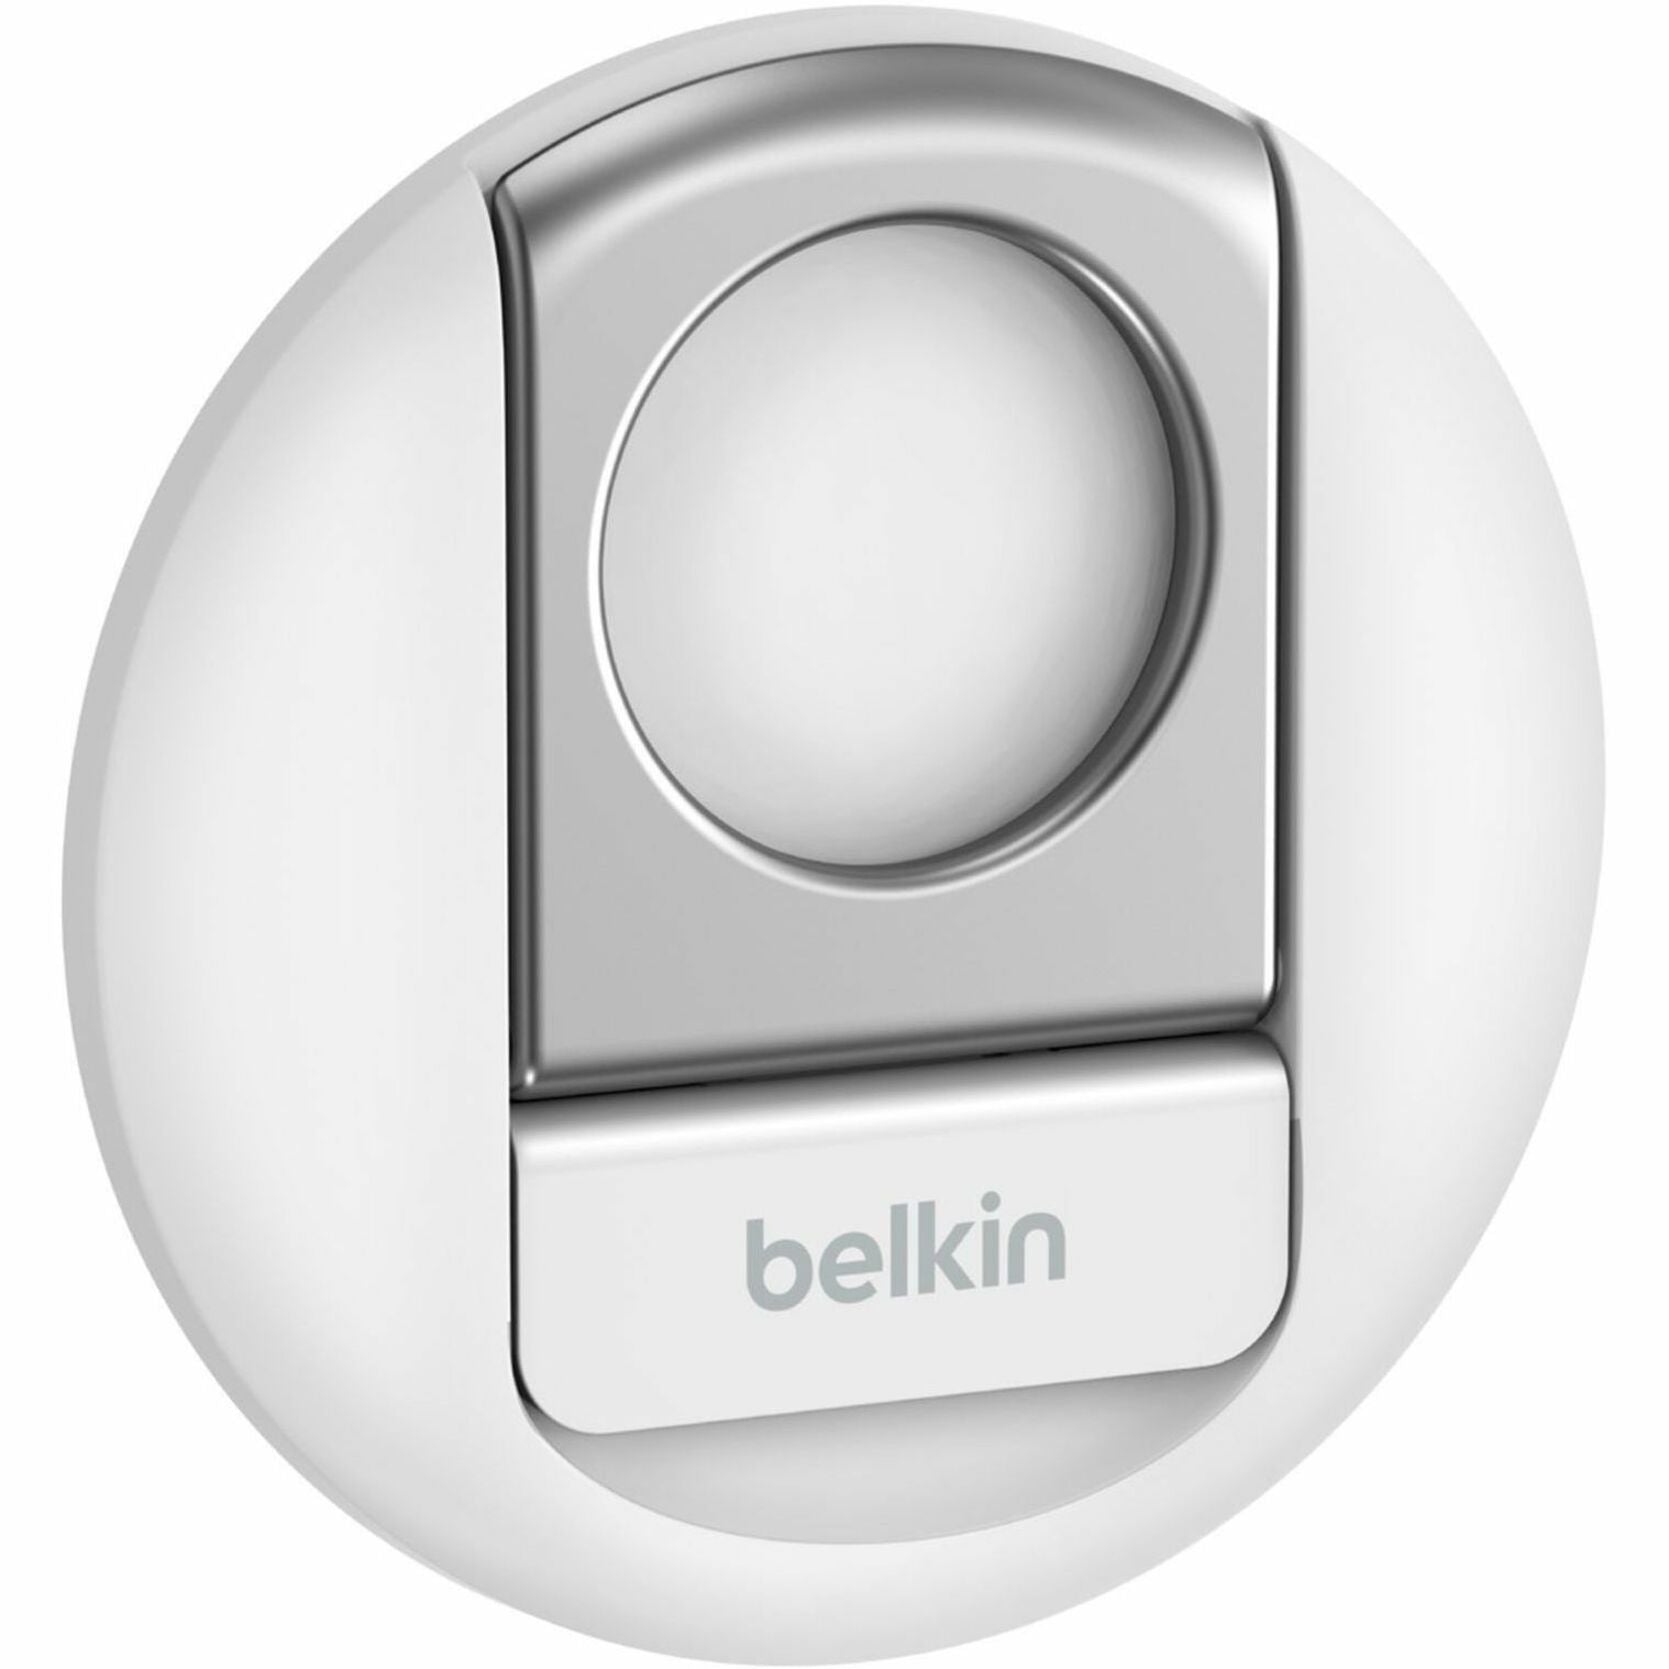 Belkin MMA006BTWH iPhone Mount with MagSafe for Mac Notebooks, Magnetic Kickstand, White